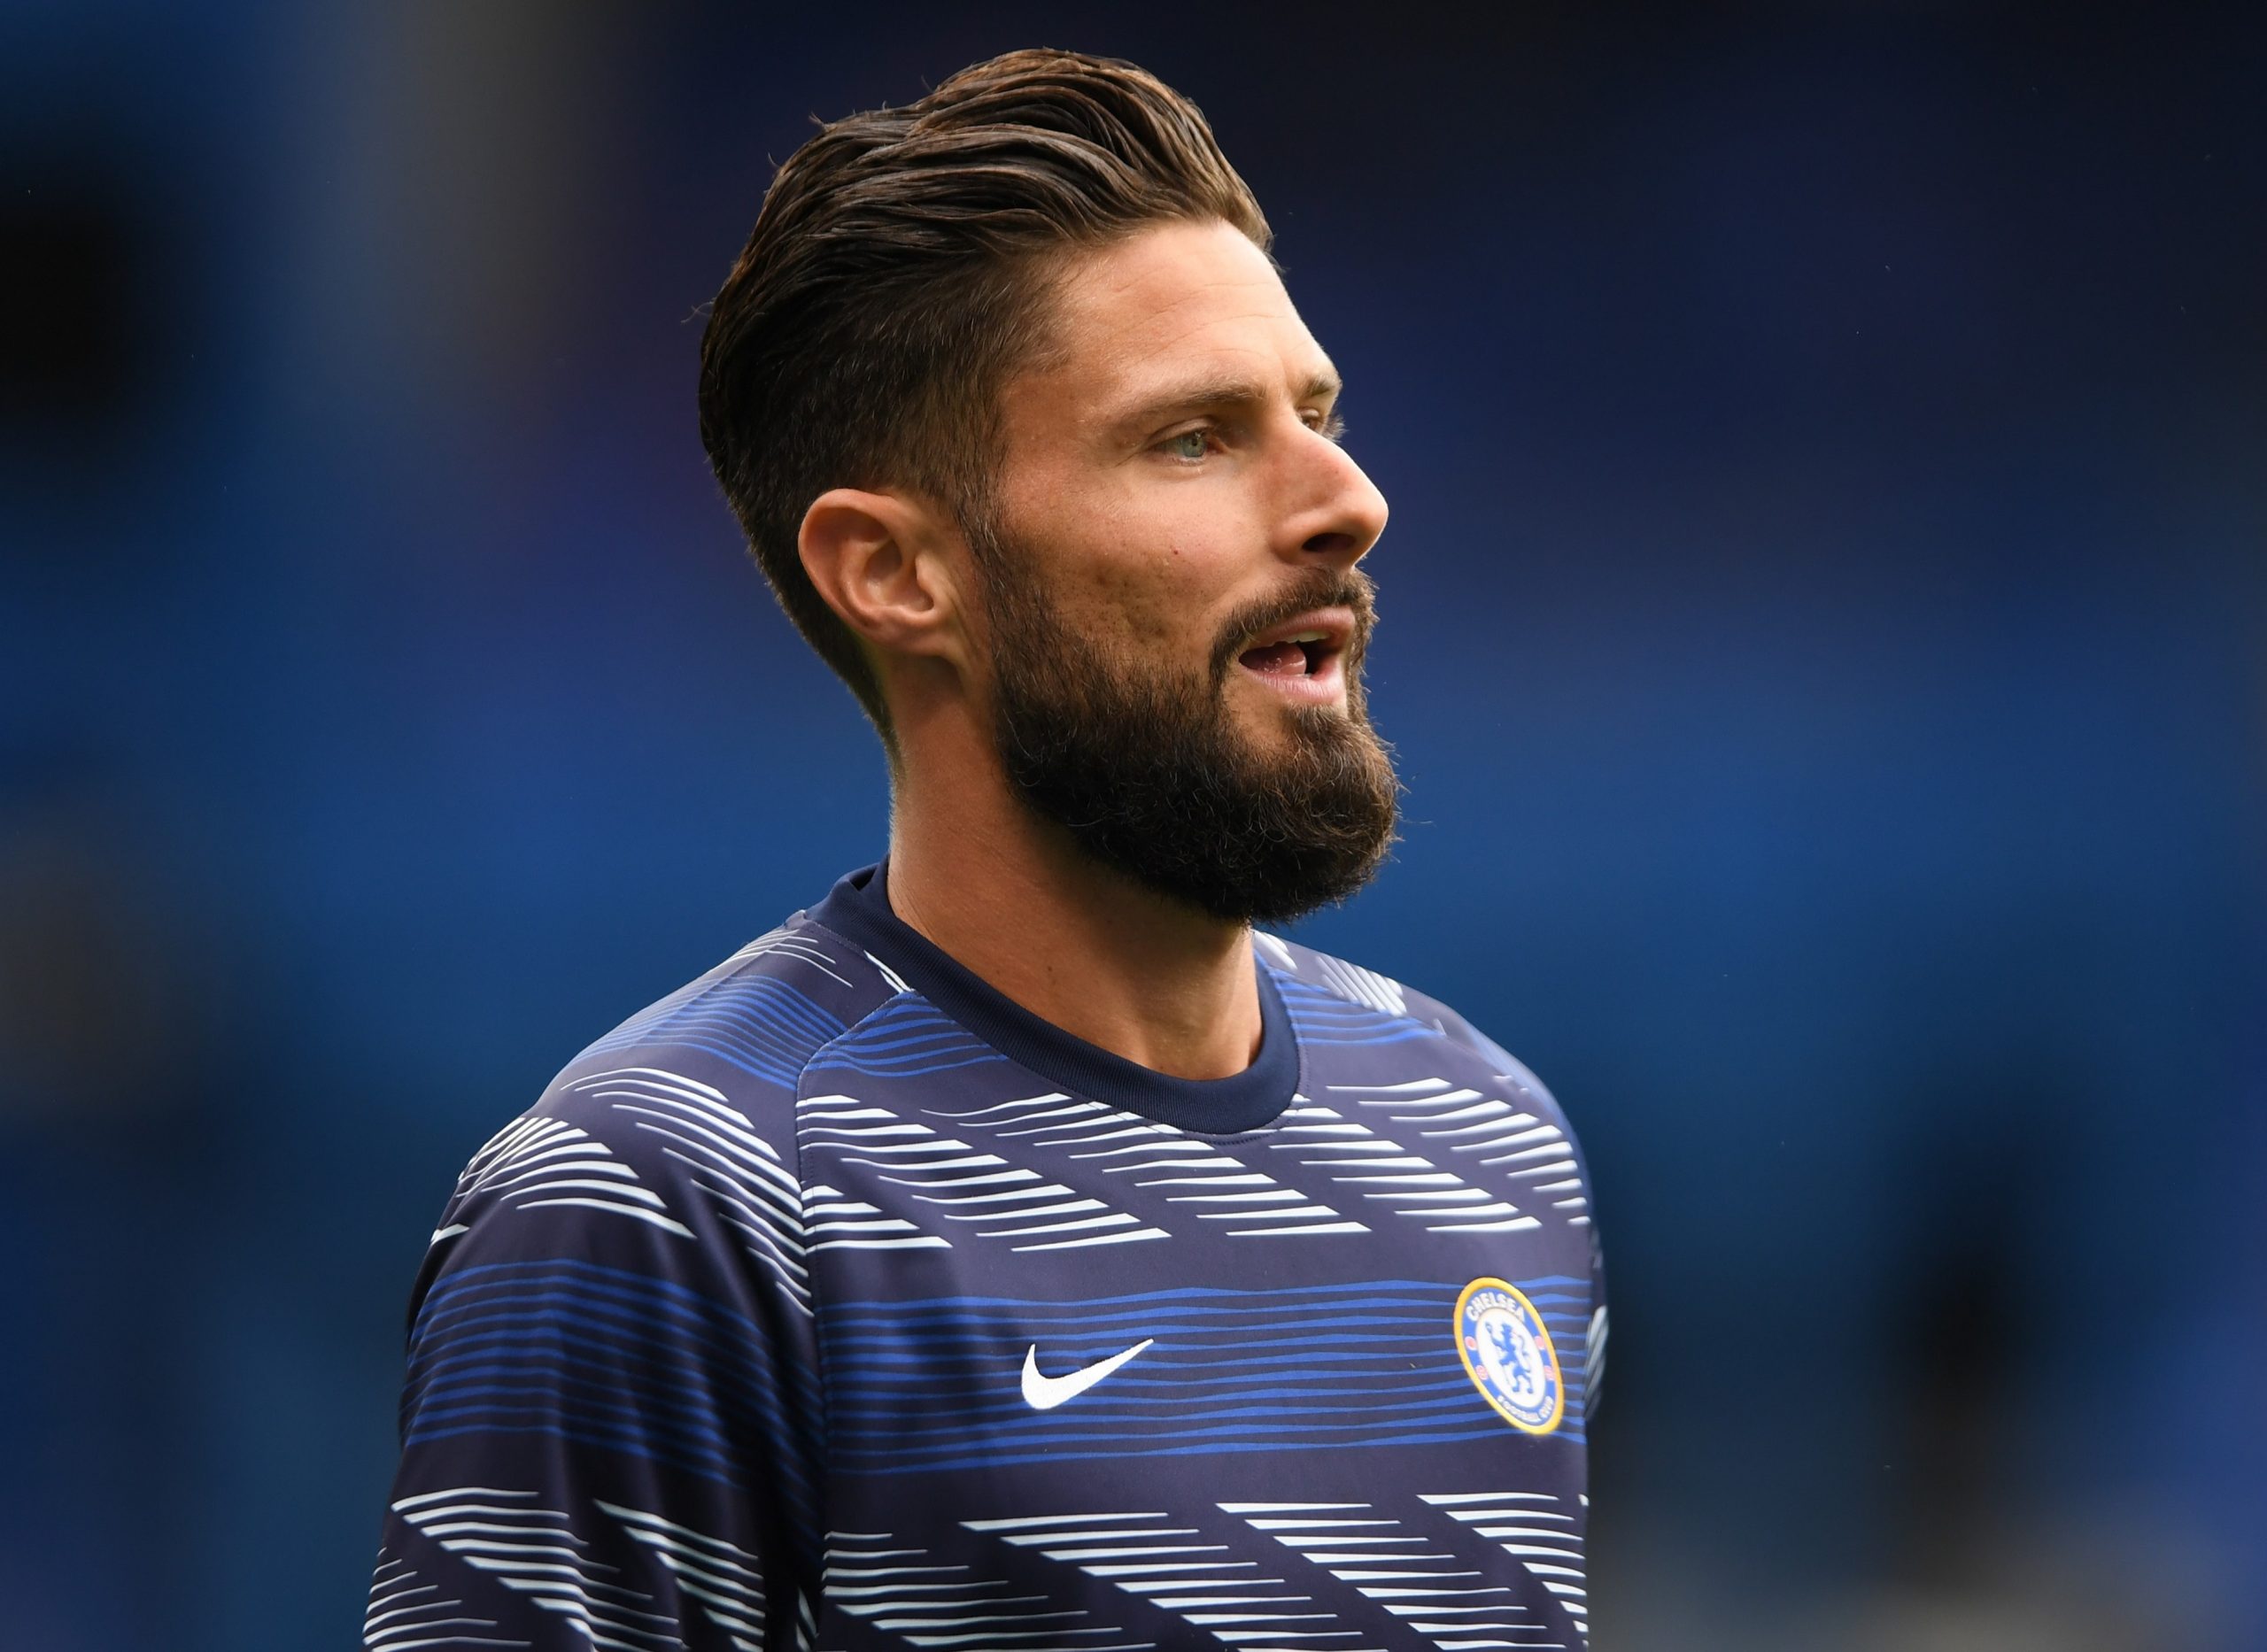 Olivier Giroud takes a dig at Tottenham Hotspur while opening up about his time at Chelsea,